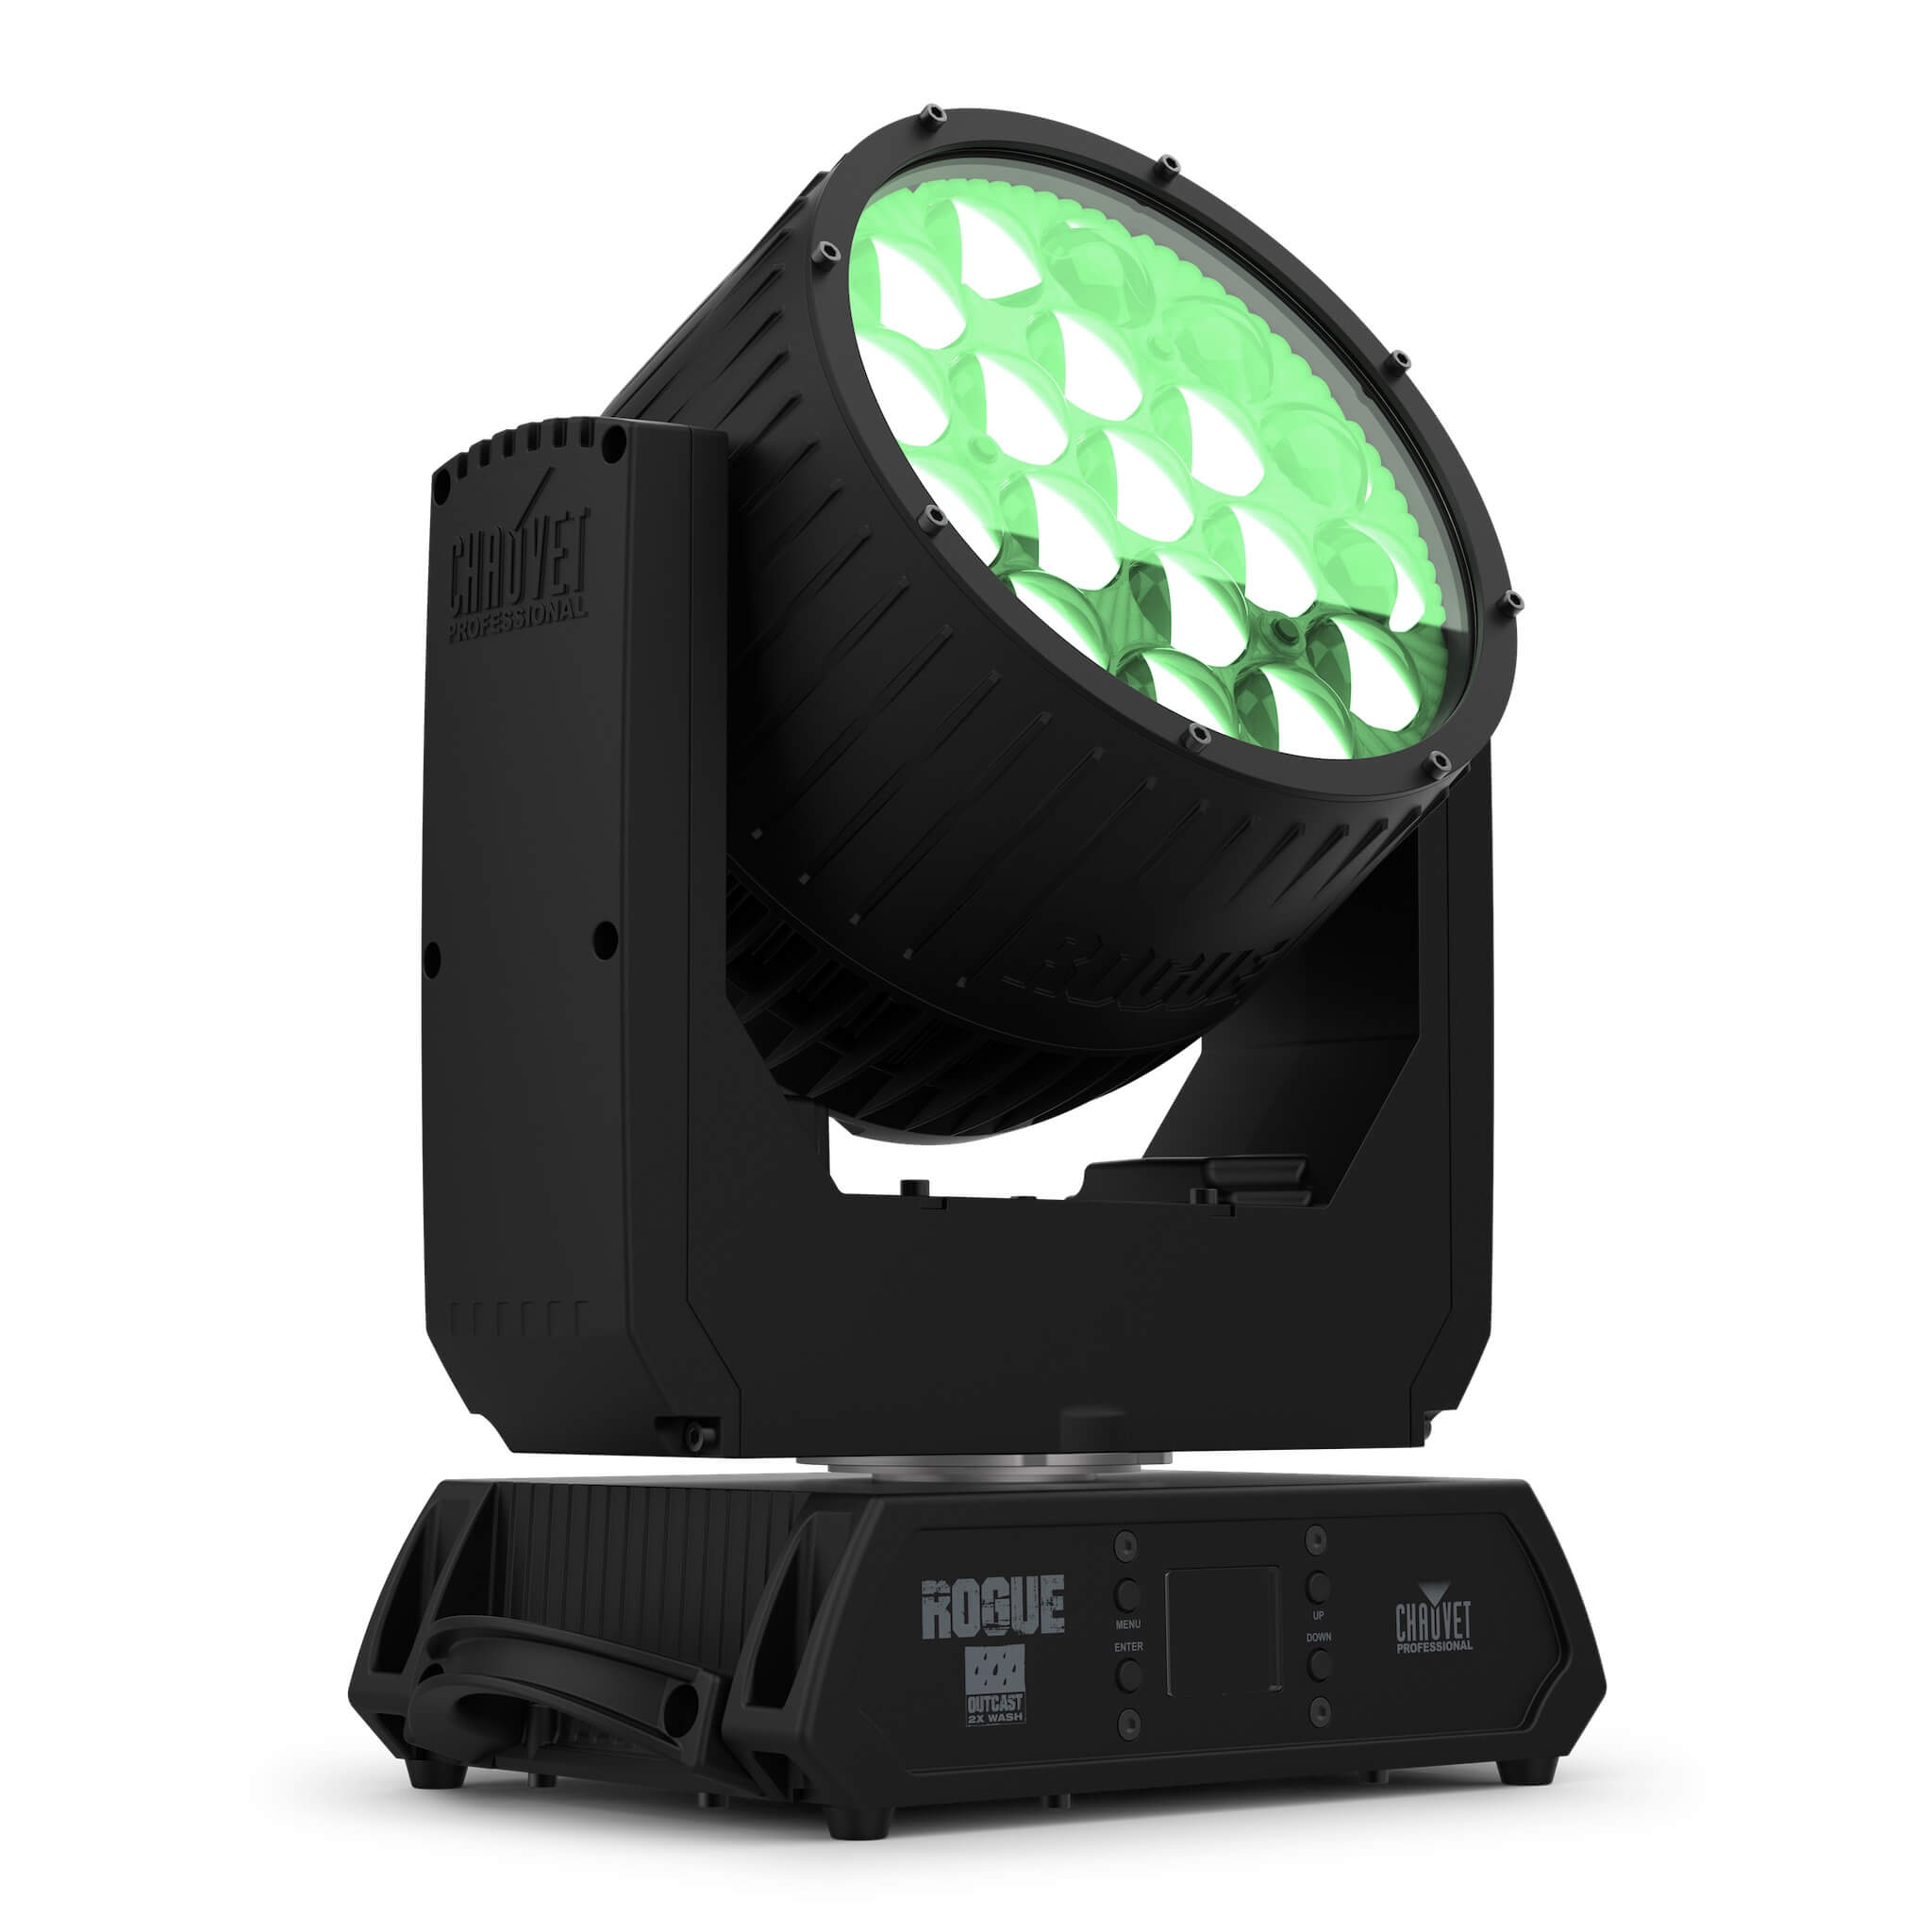 Chauvet Professional Rogue Outcast 2X Wash - LED Moving Head Light, right